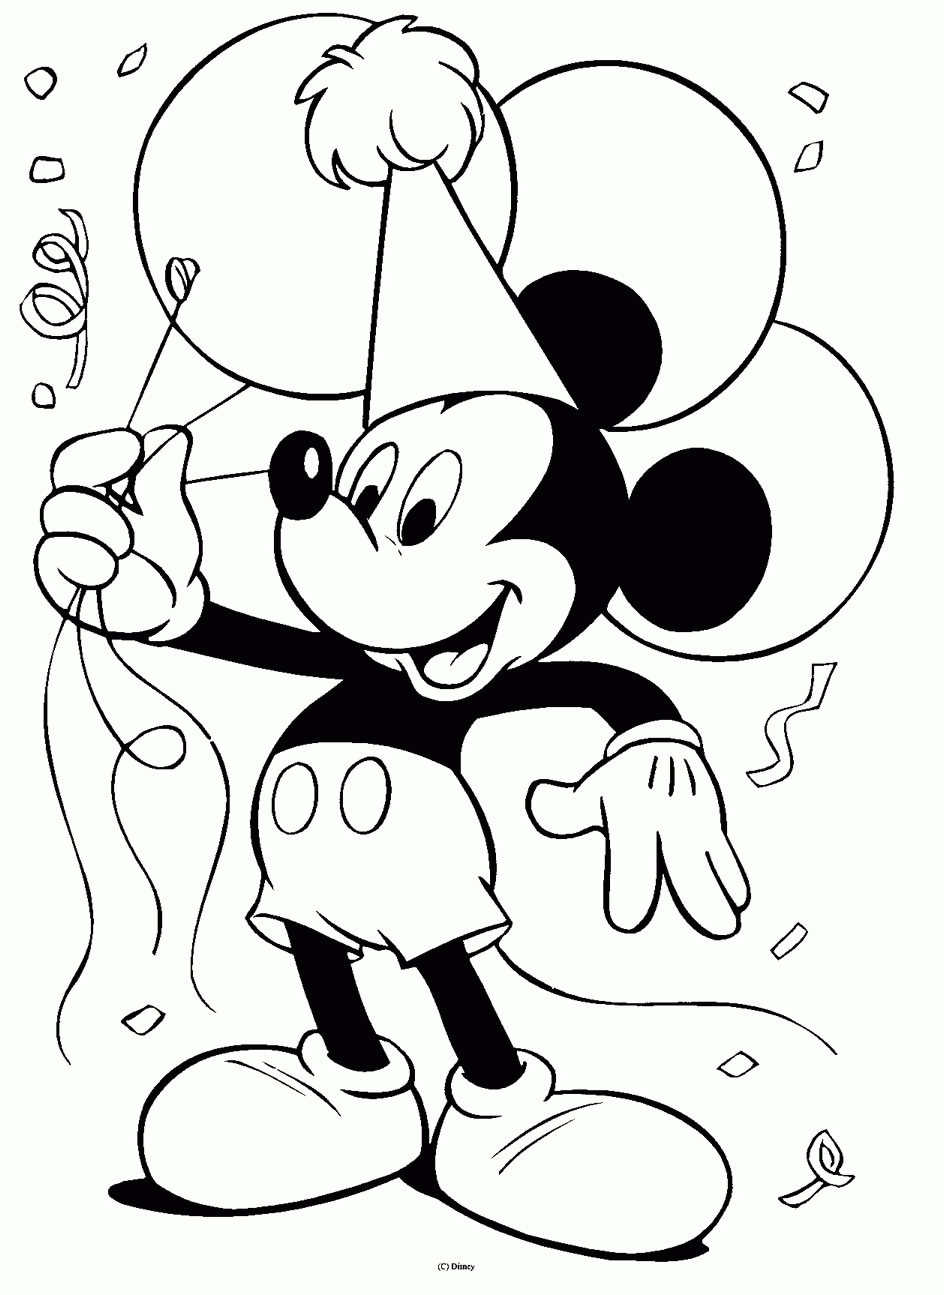 Download Coloring Pages of Disney Characters | So Percussion